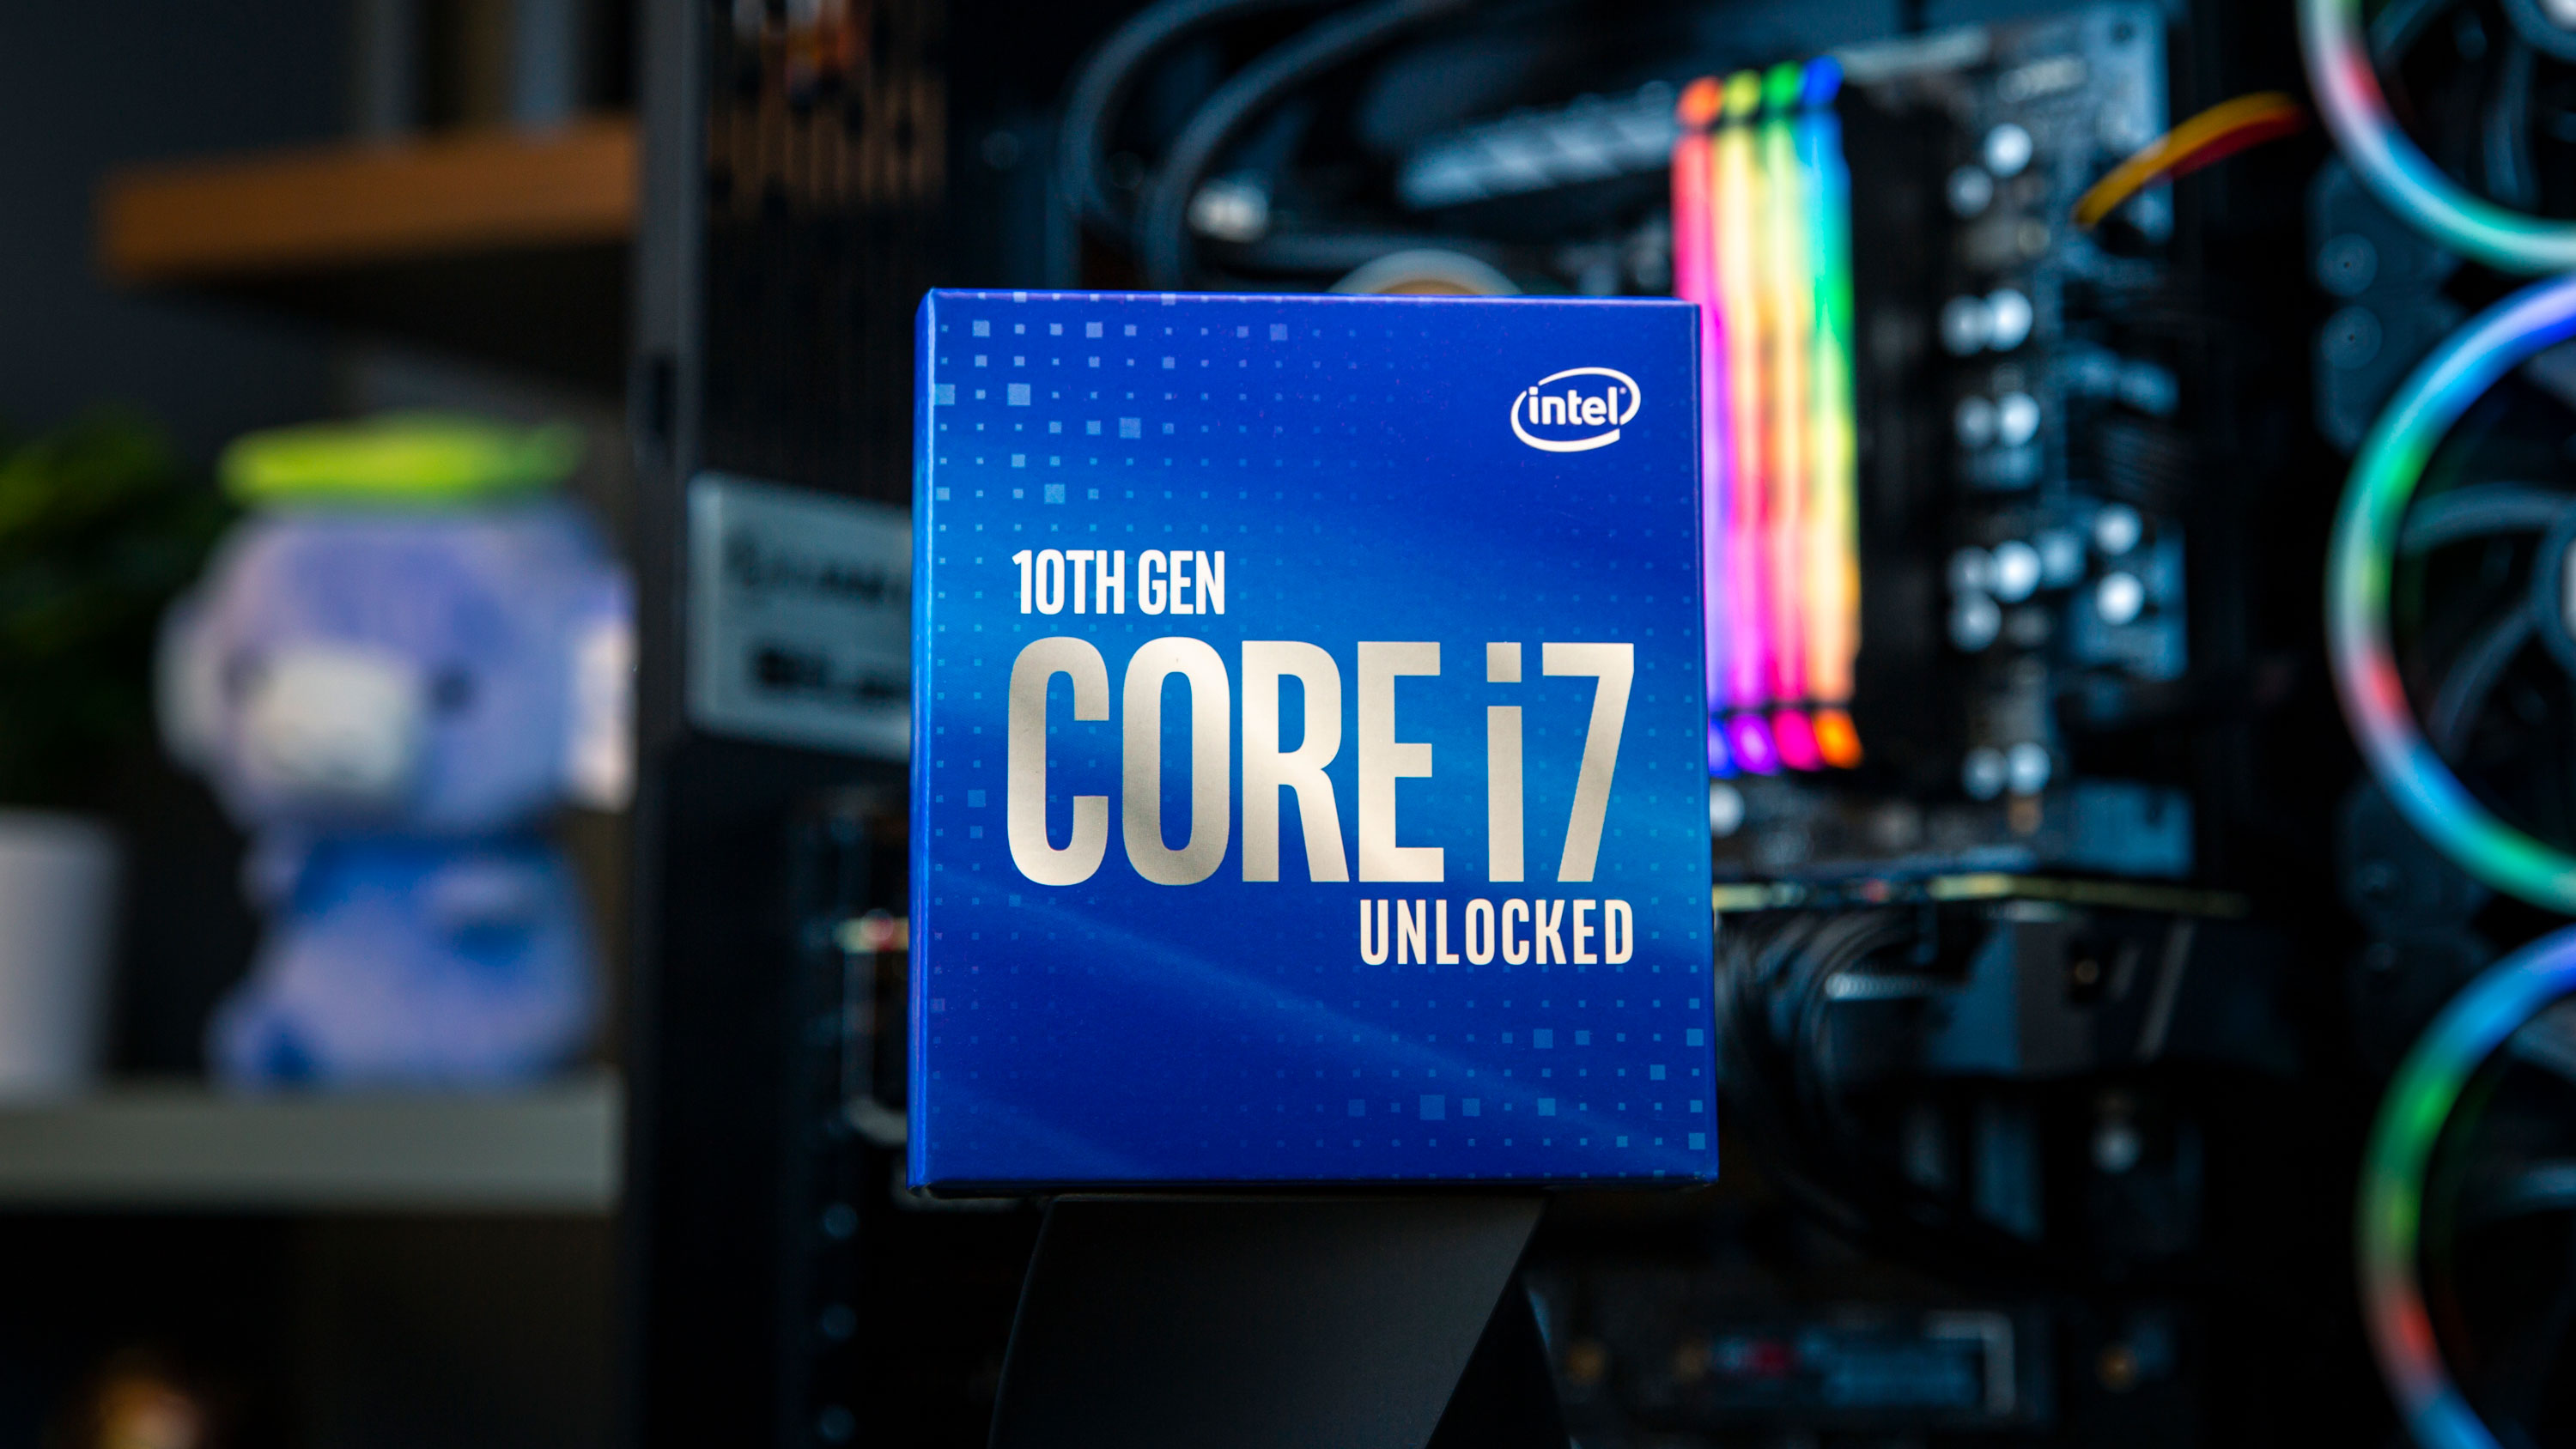 Binned Intel Core i7-10700K at 5.1 GHz Selling for $559 | Tom's Hardware